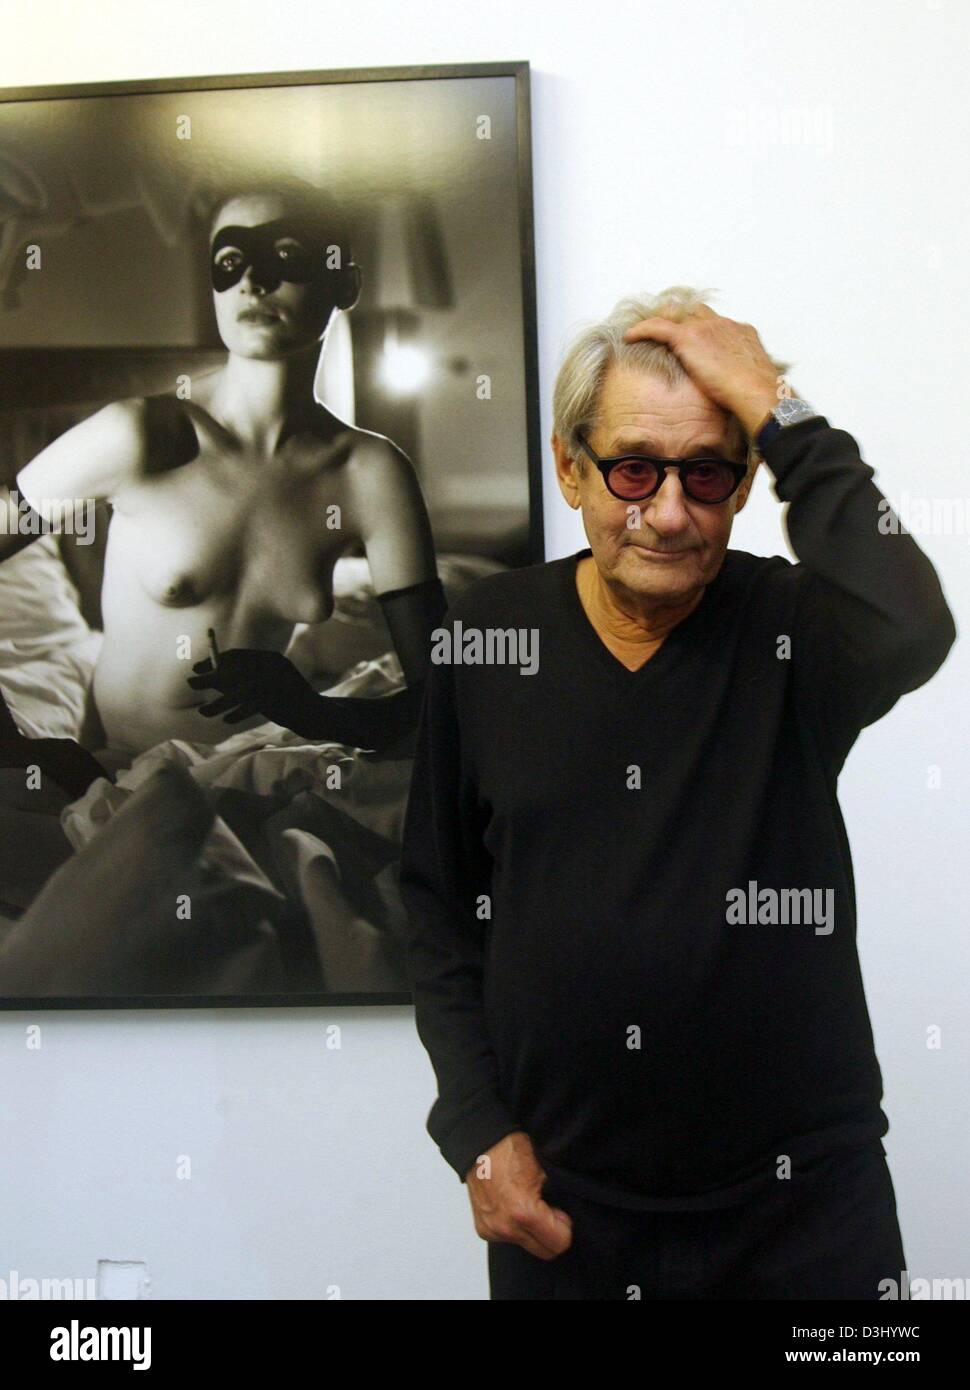 (dpa files) - Star photographer Helmut Newton stands in front of one of his photographs in an exhibition hall in Duesseldrof, Germany, 22 October 2002. 83-year-old Newton died after losing control of his car when leaving the car park at a hotel in Los Angeles on 23 January 2004, police said. Friends presume a possible heart attack.  Newton was a world famous art photographer who sp Stock Photo